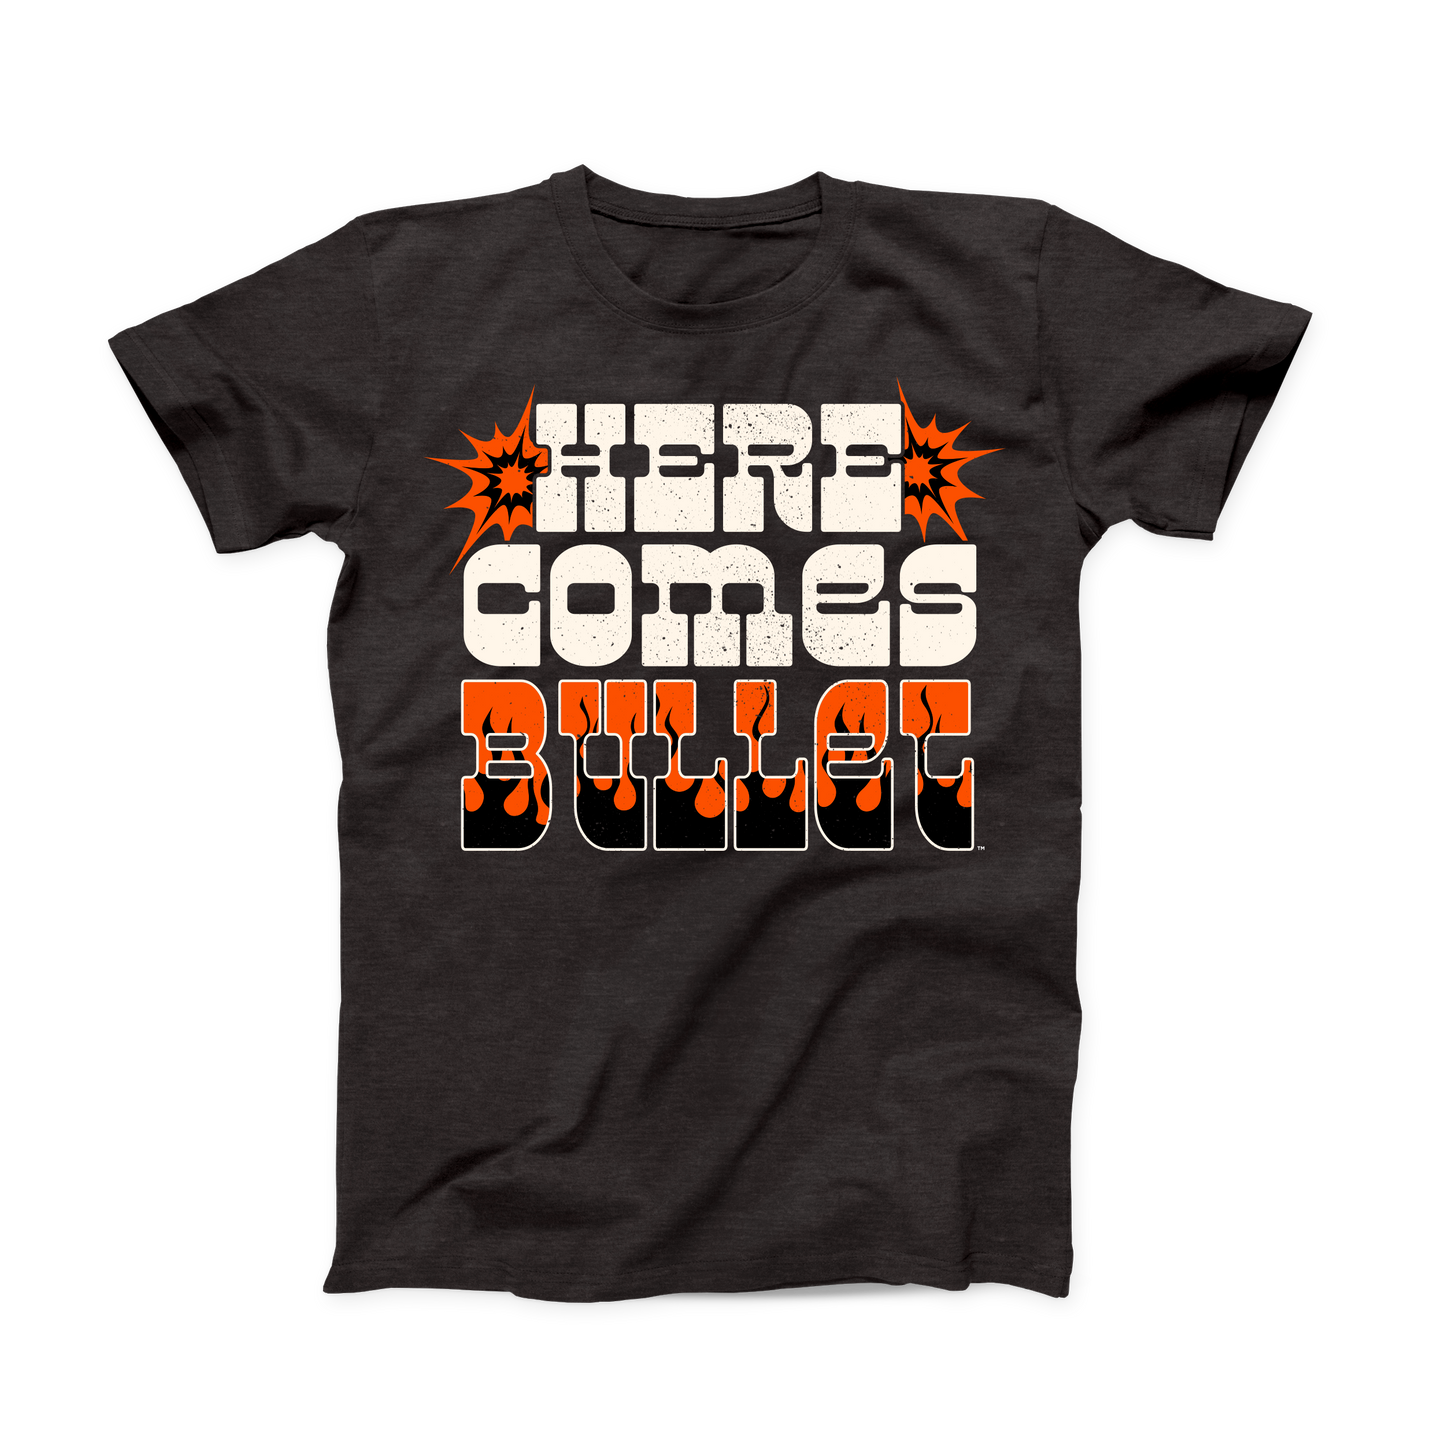 "Here Comes Bullet" OSU T-shirt